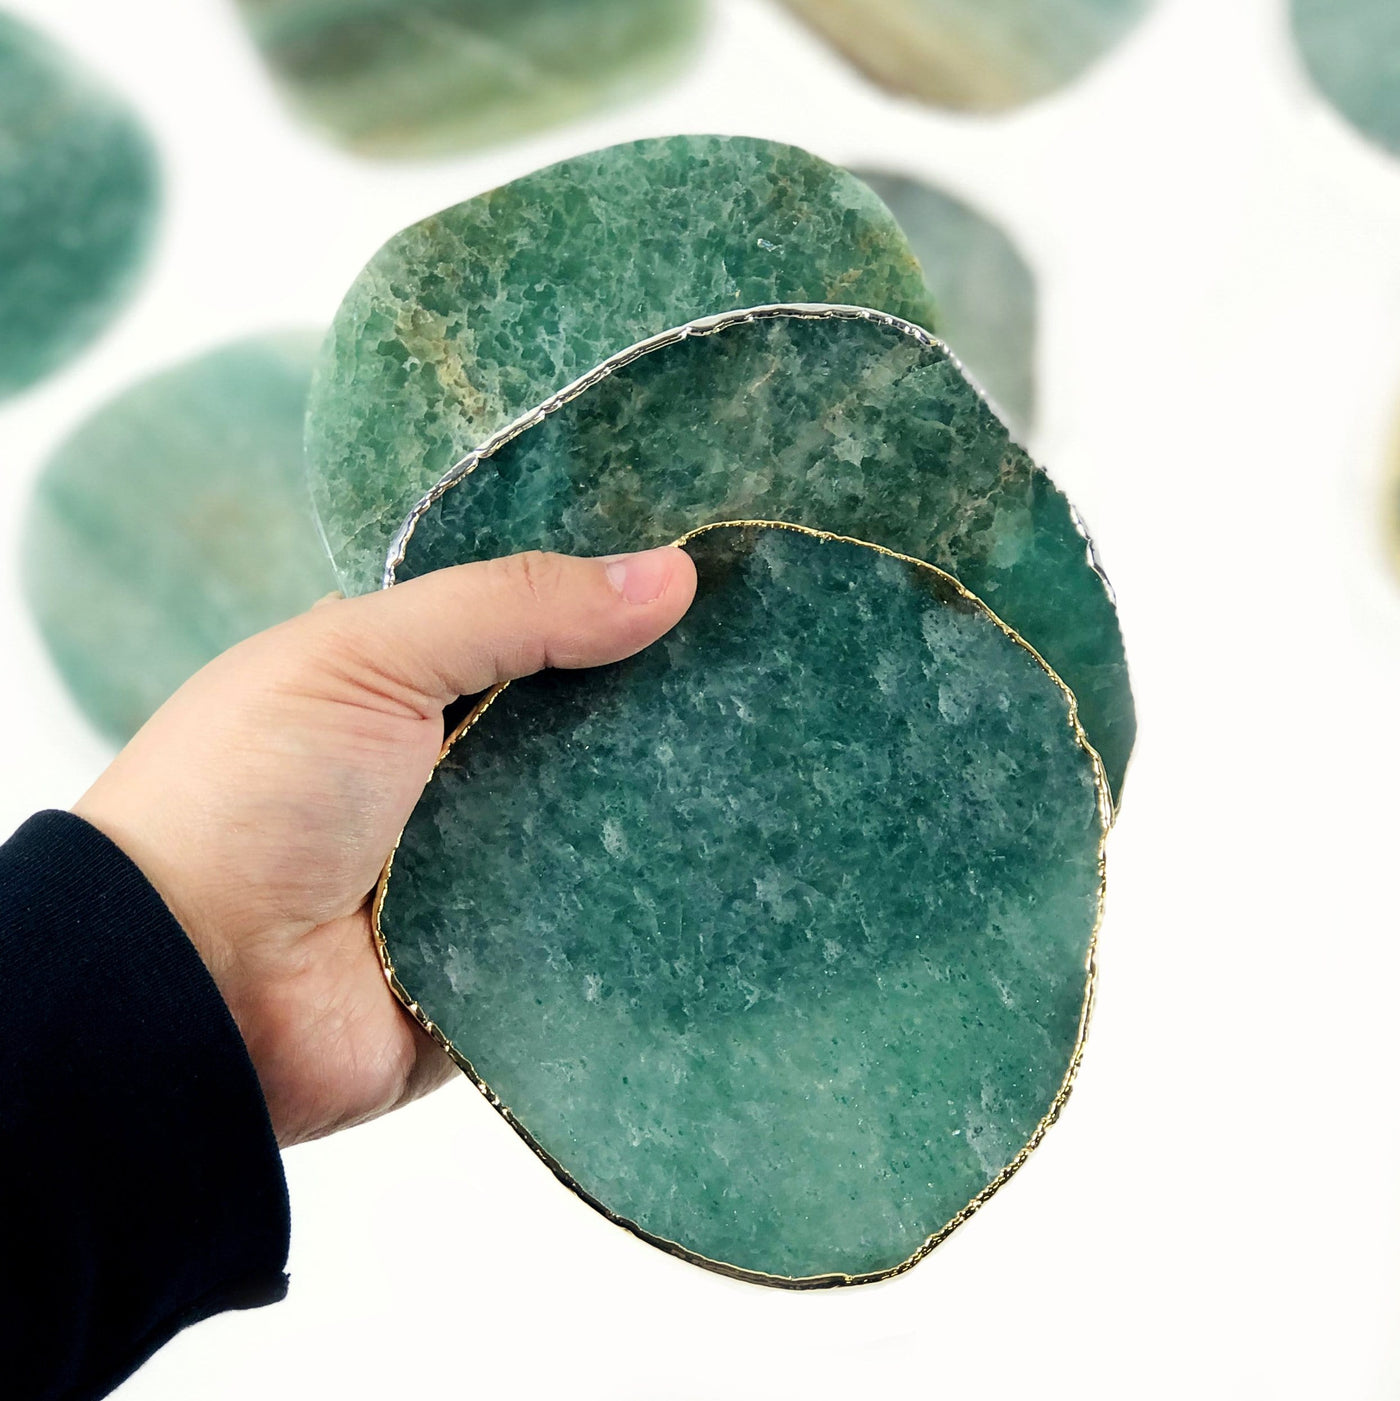 green quartz coasters displayed in hand to show size reference and edges come in gold silver and raw edge